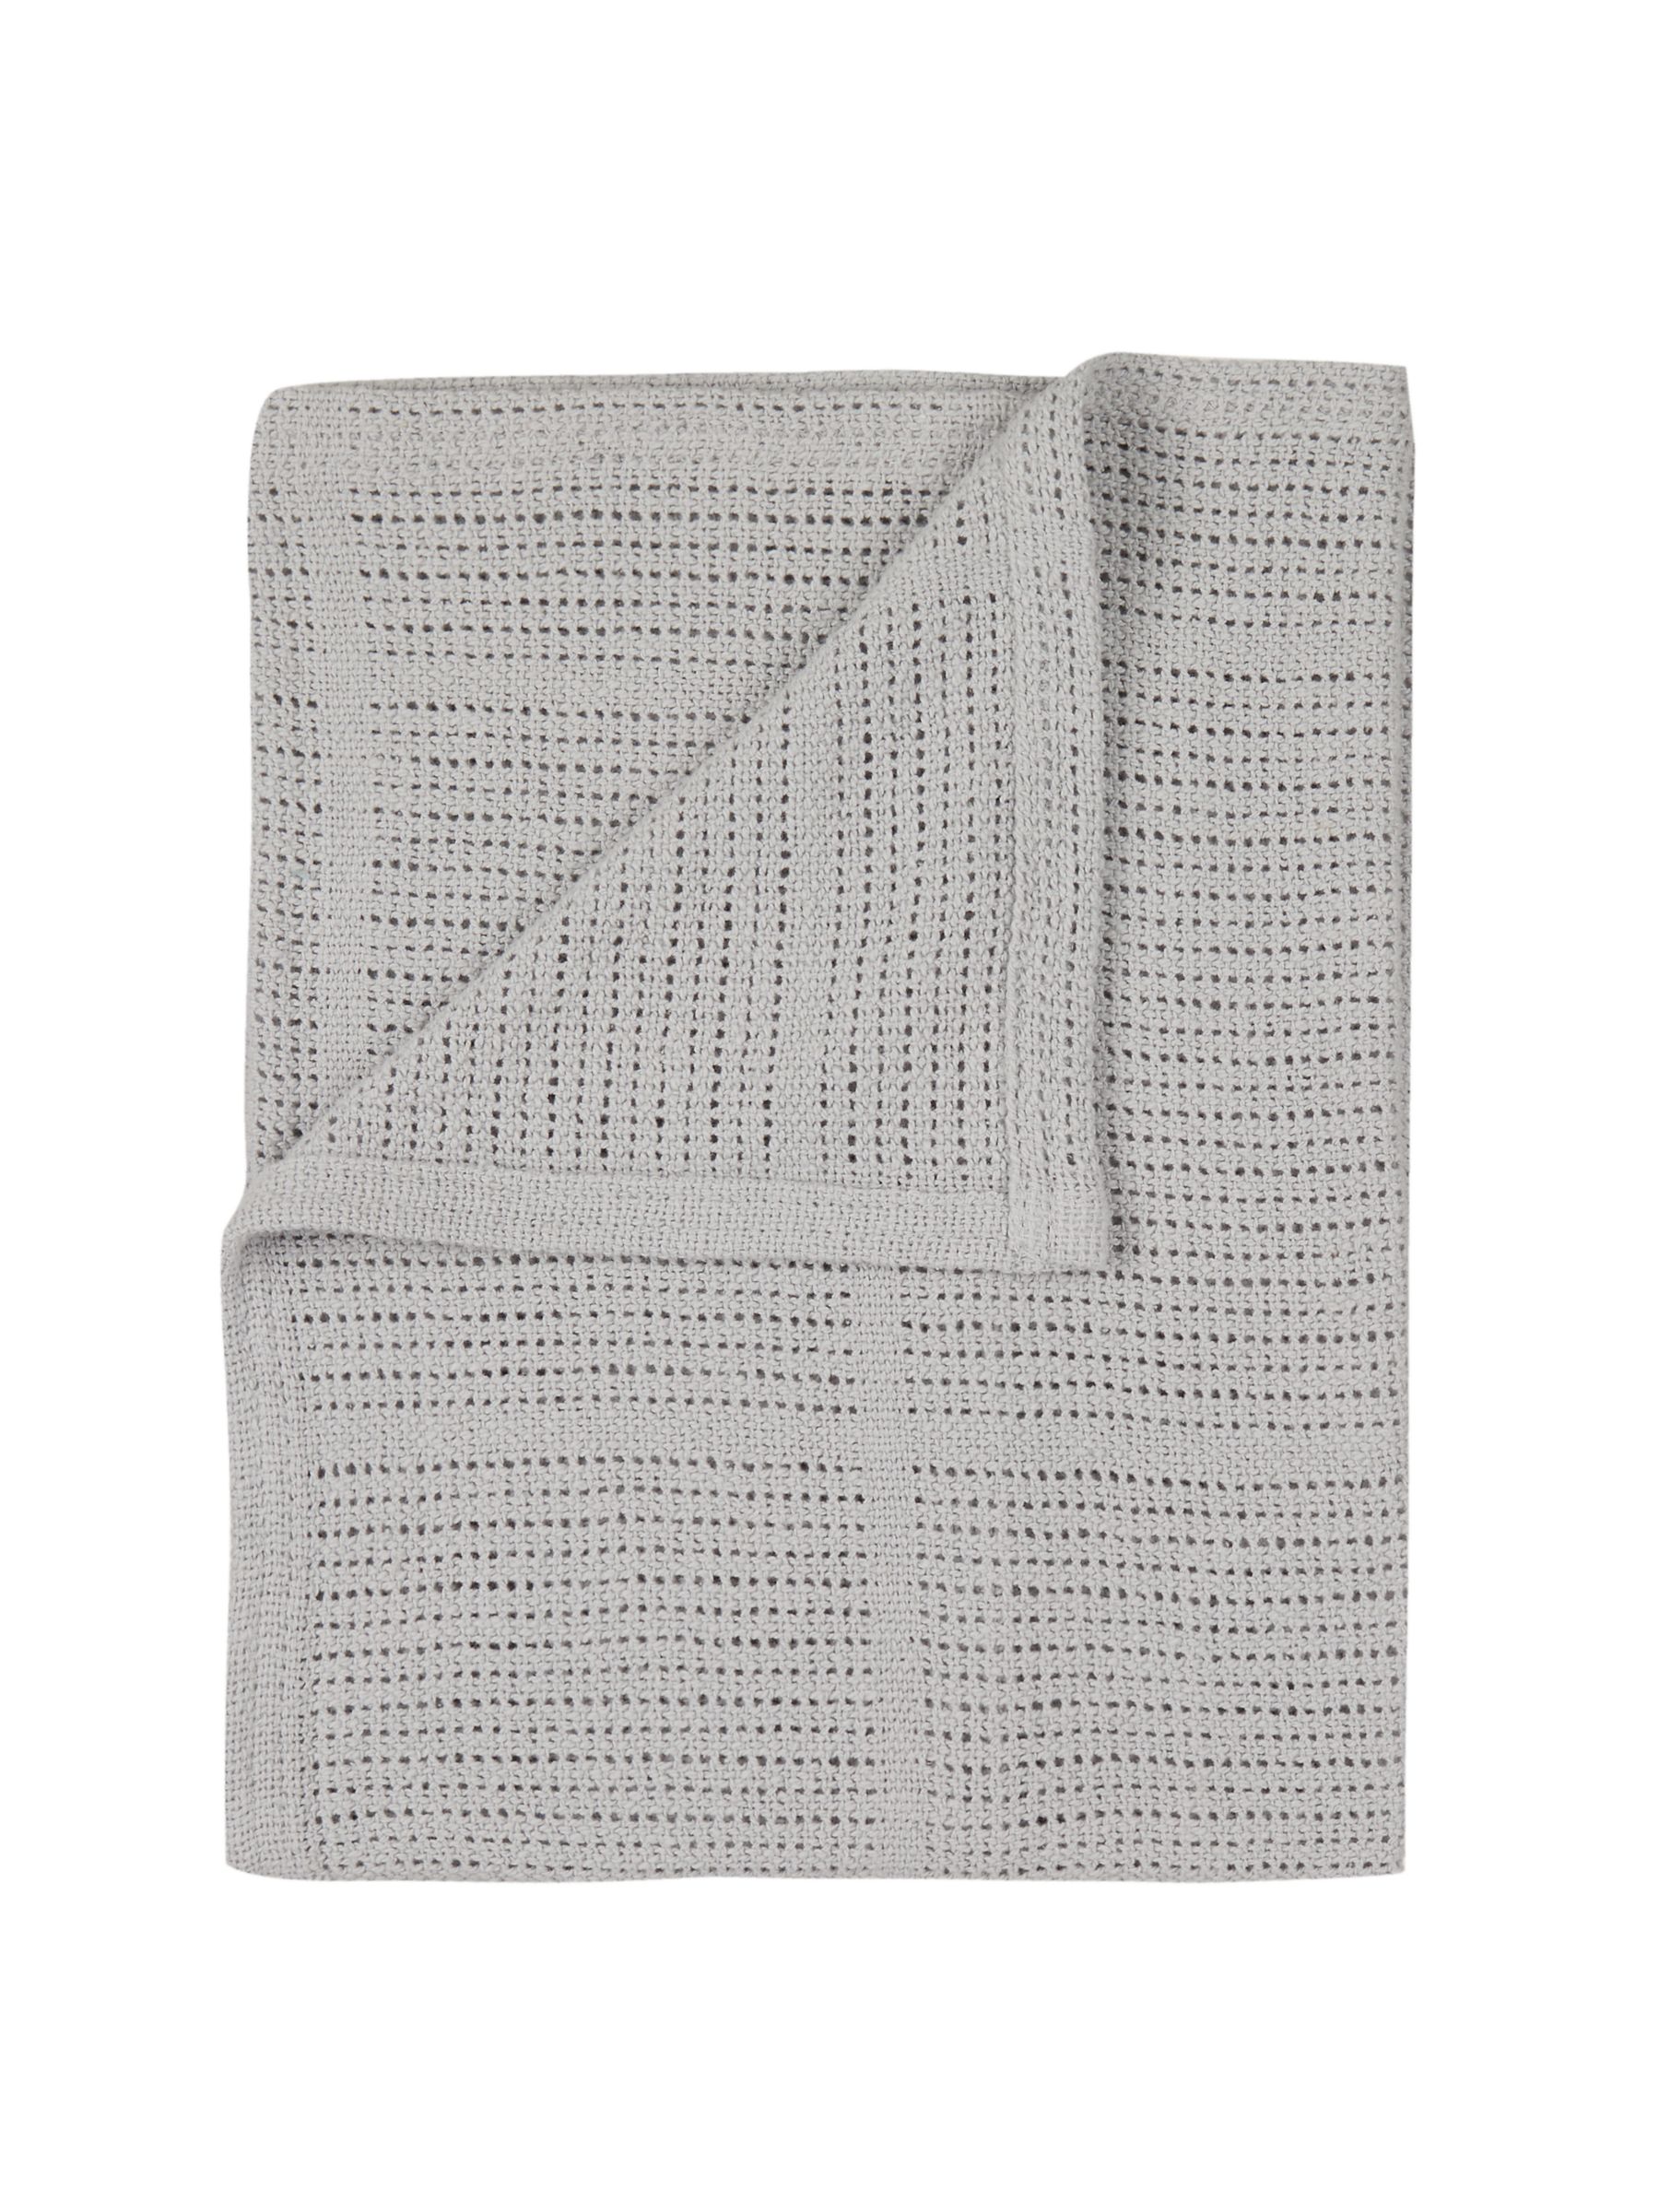 John Lewis & Partners Baby Cellular Cot/Cotbed Blanket, 160 x 130cm at ...